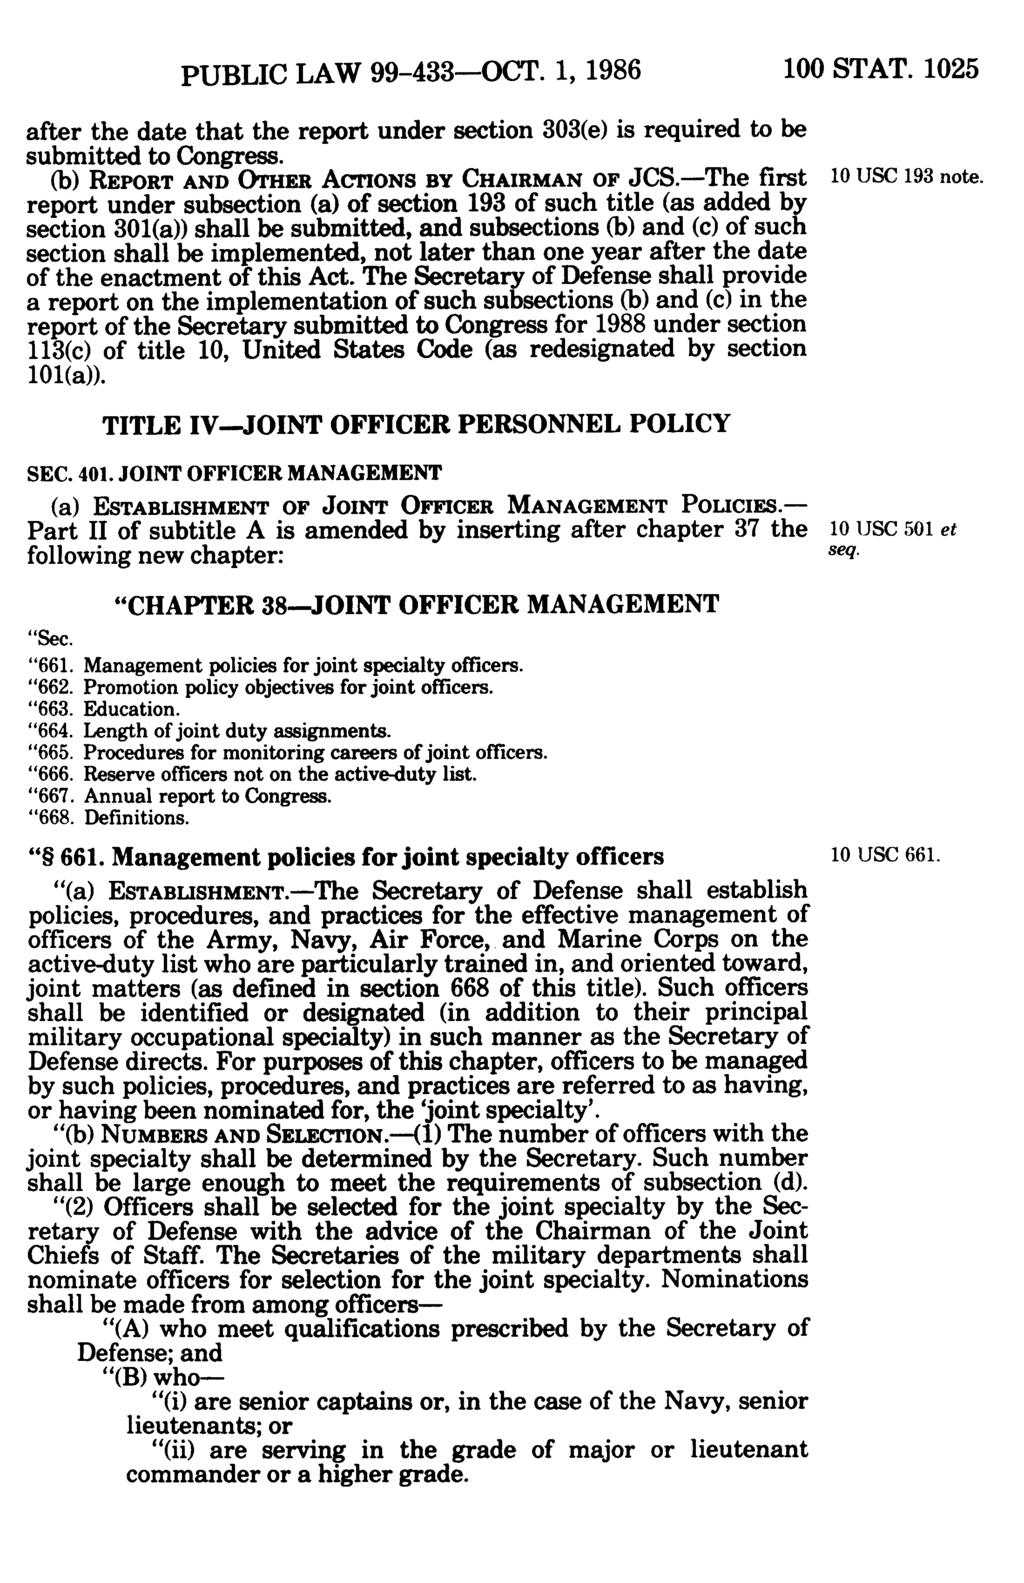 PUBLIC LAW 99-433-OCT. 1, 1986 100 STAT. 1025 after the date that the report under section 303(e) is required to be submitted to Congress. (b) REPORT AND OTHER ACTIONS BY CHAIRMAN OF JCS.